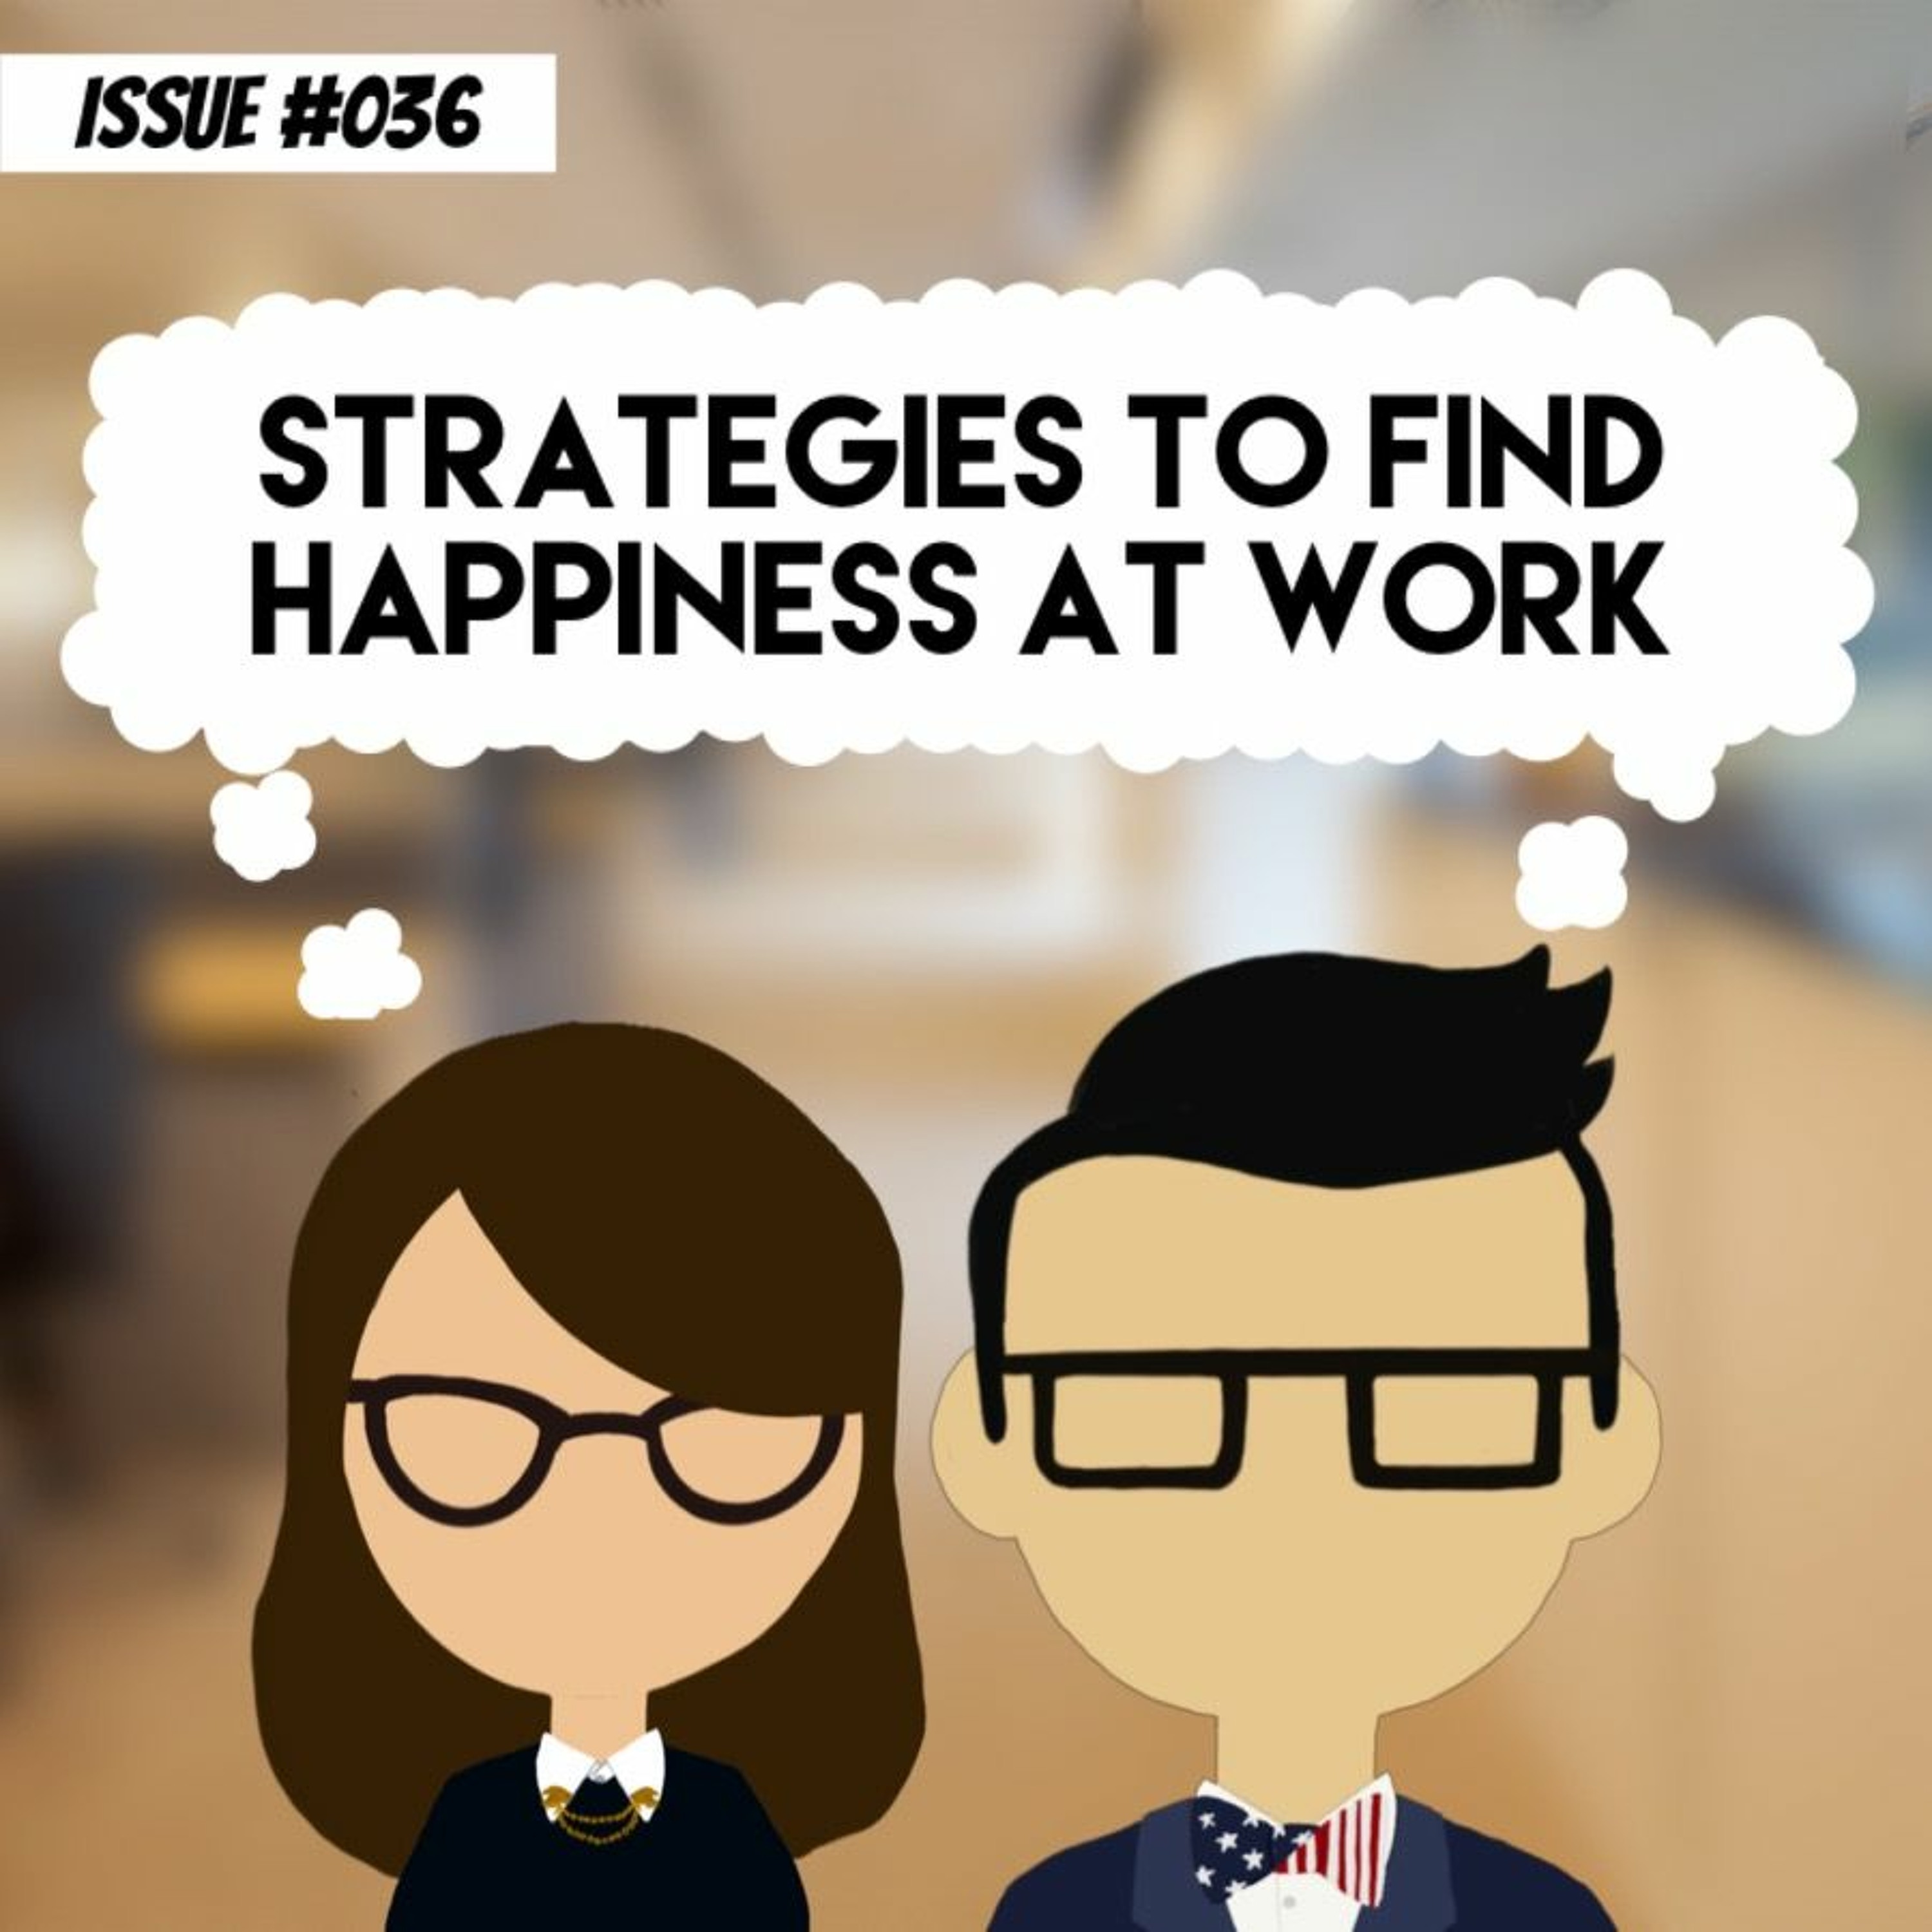 Career Advice: Strategies to find happiness at work